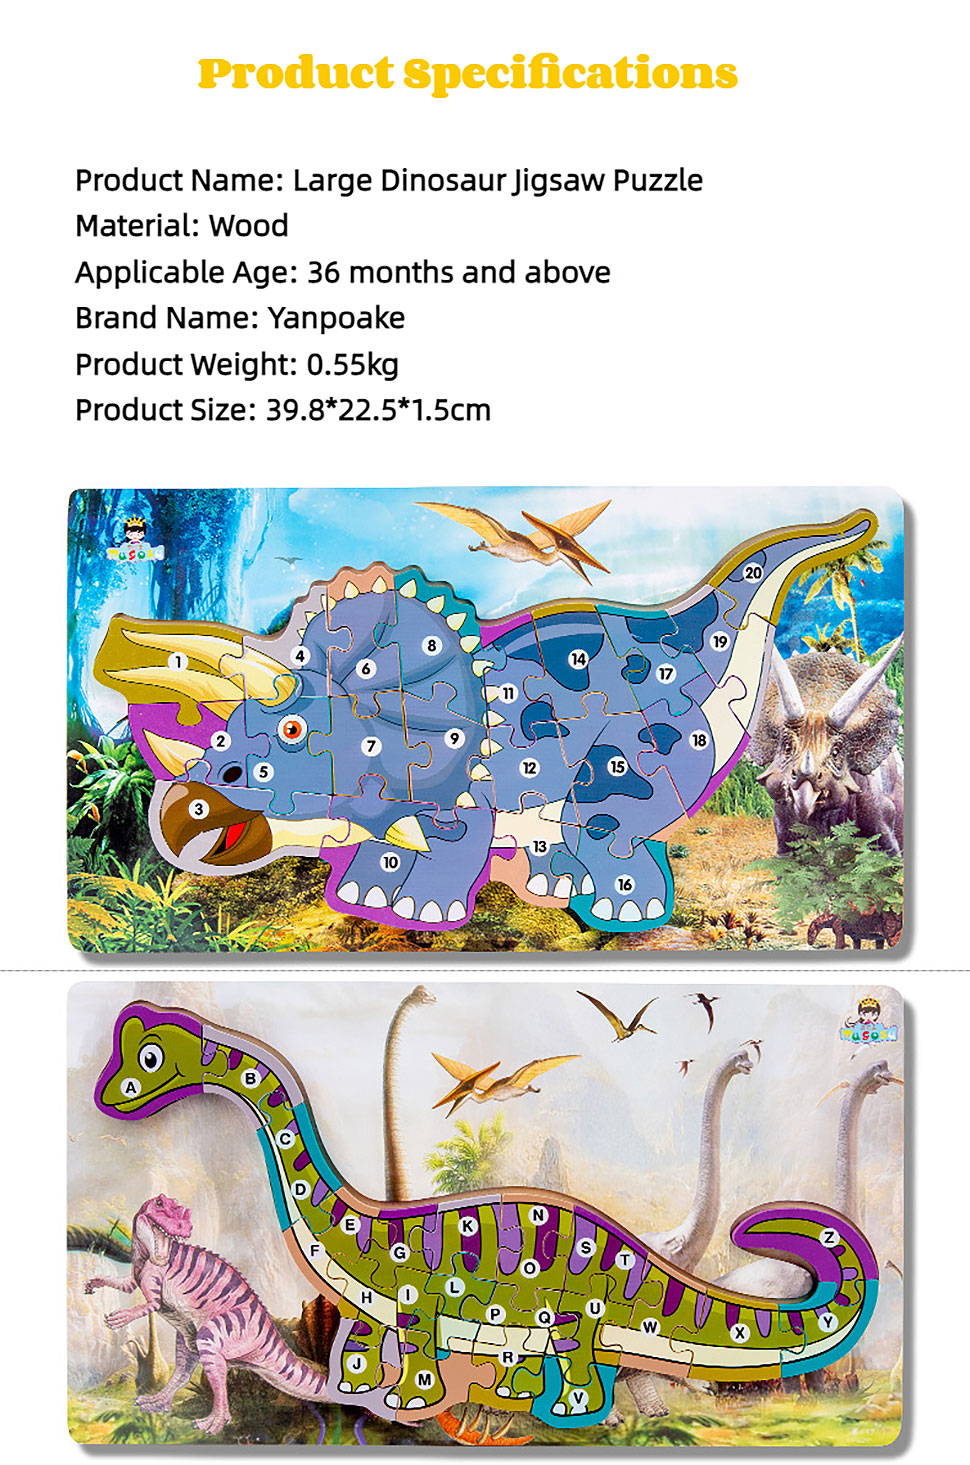 Wooden-Dinosaur-Alphabet-and-Number-3D-Jigsaw-Puzzle-Set-for-Kids-(7)